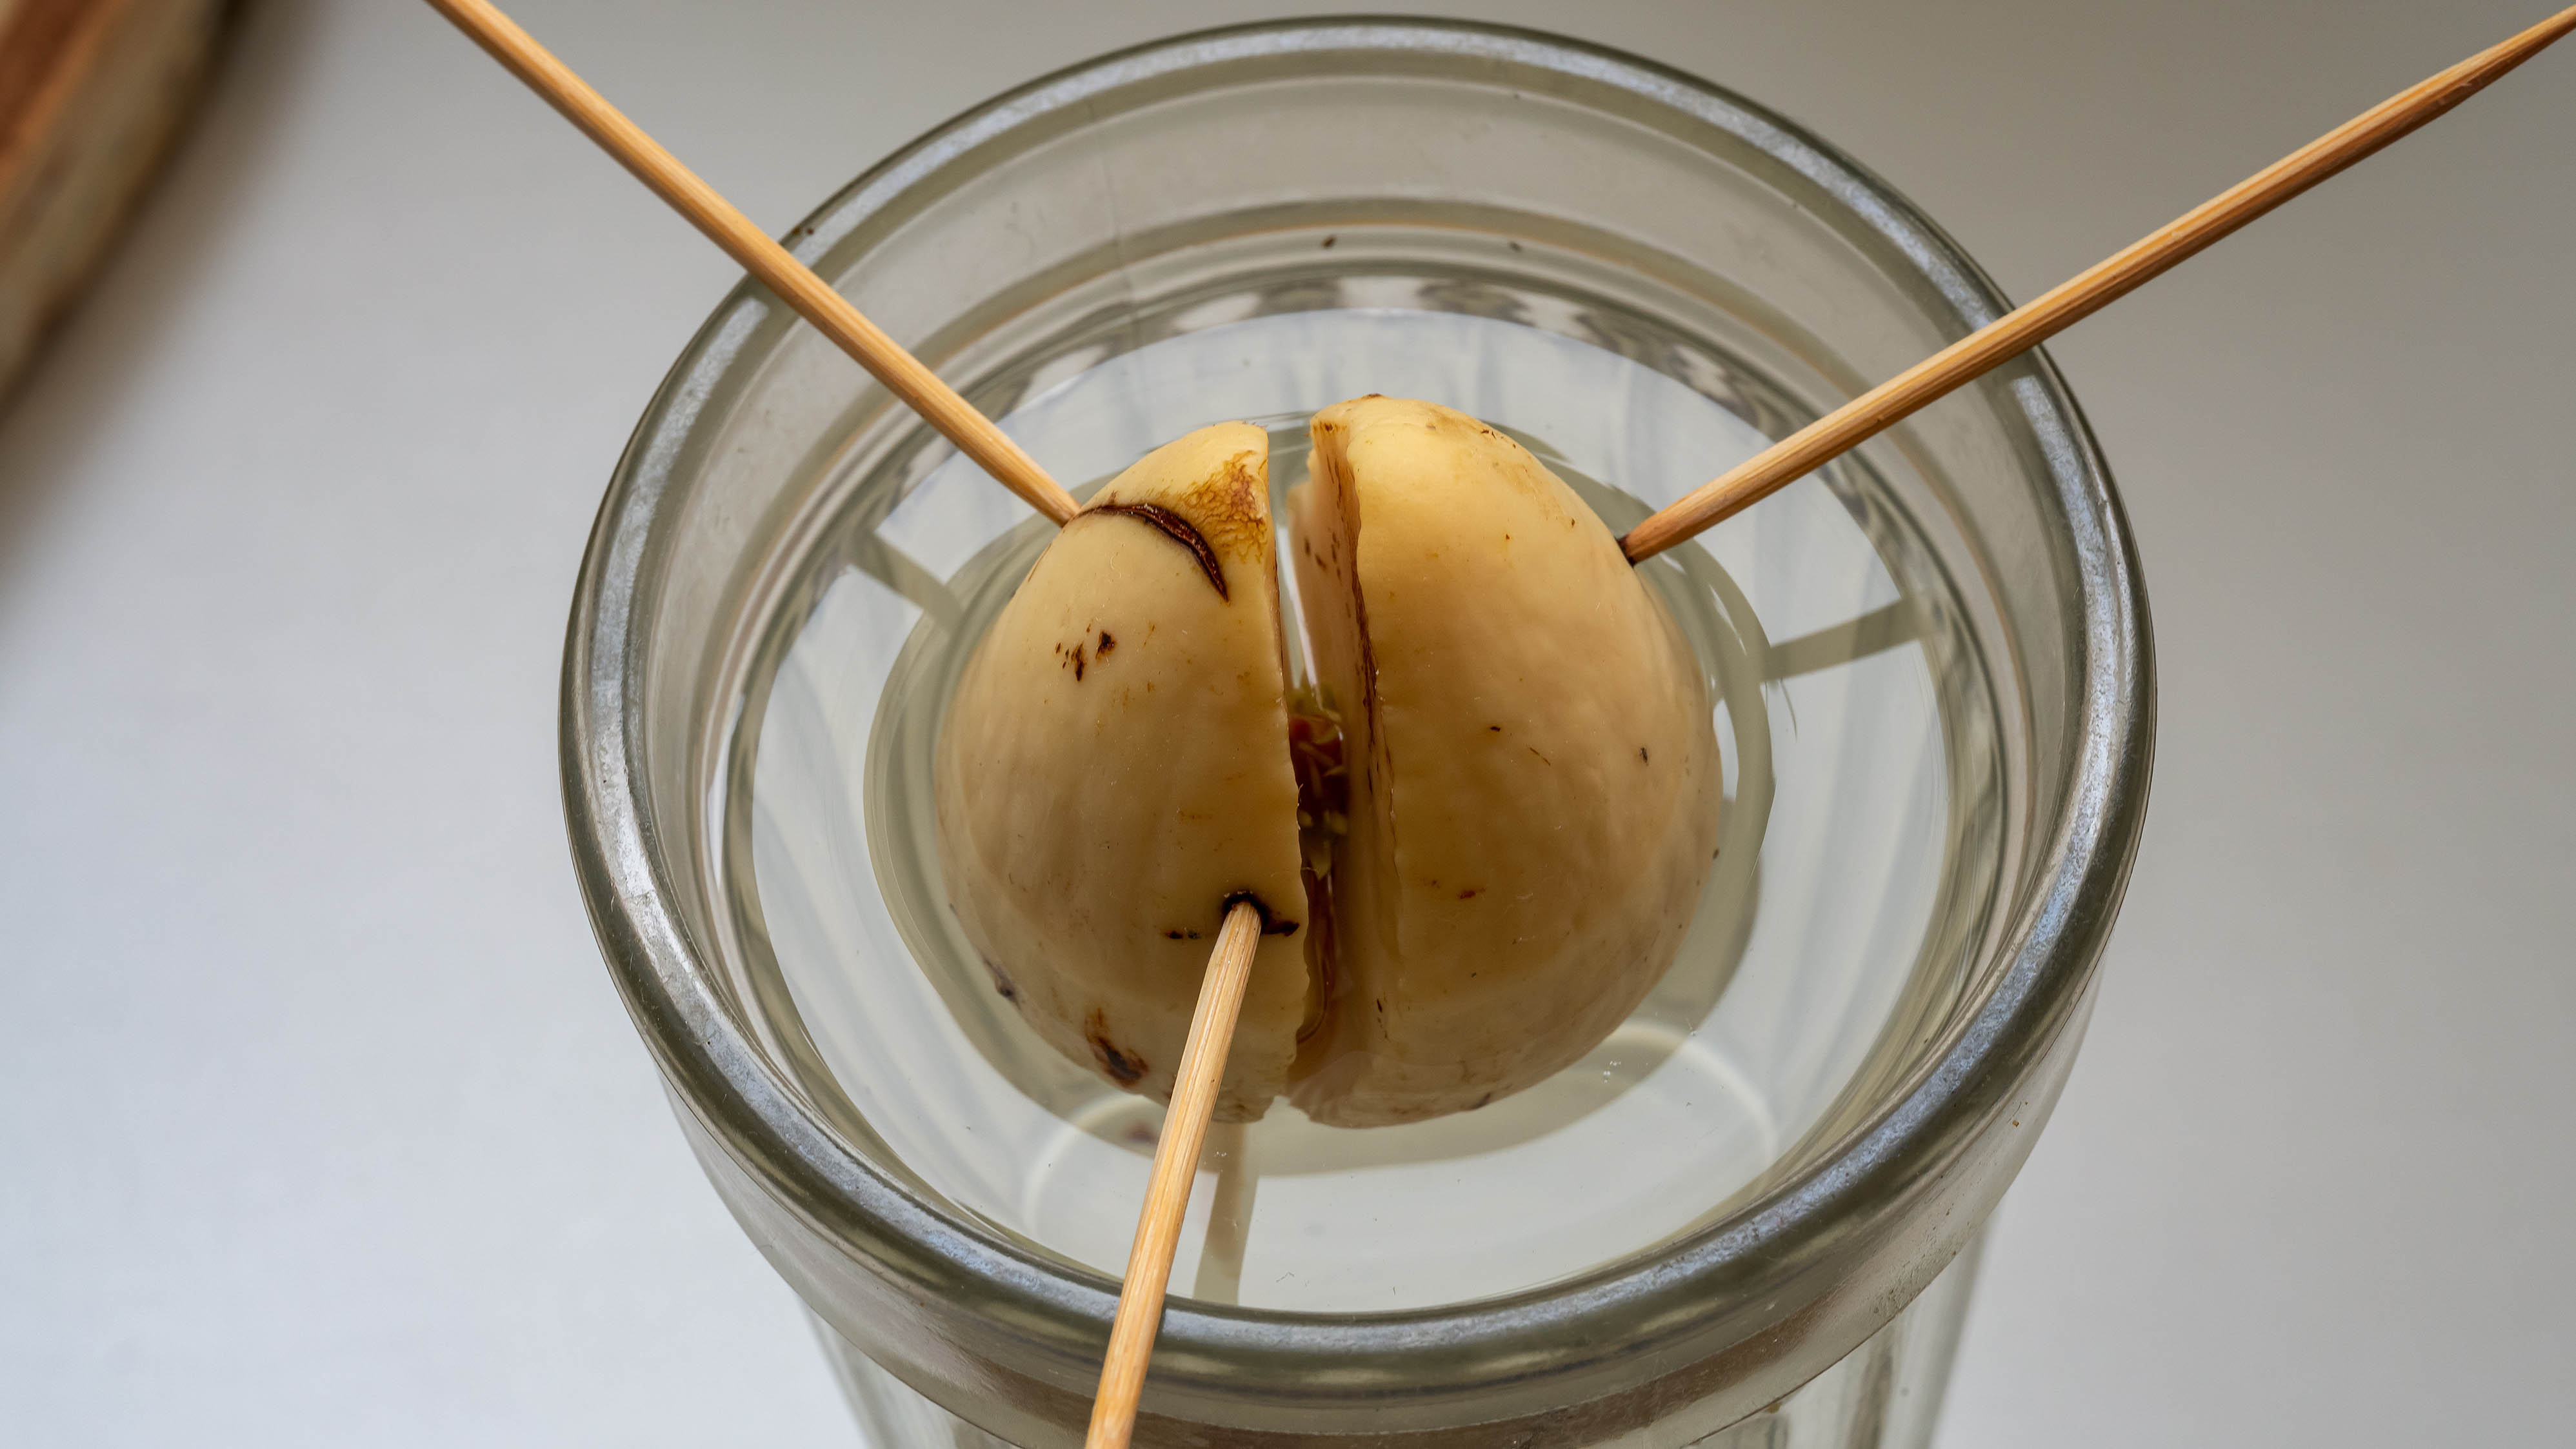 An avocado seed which has been pierced with toothpicks and is suspended above a glass of water.